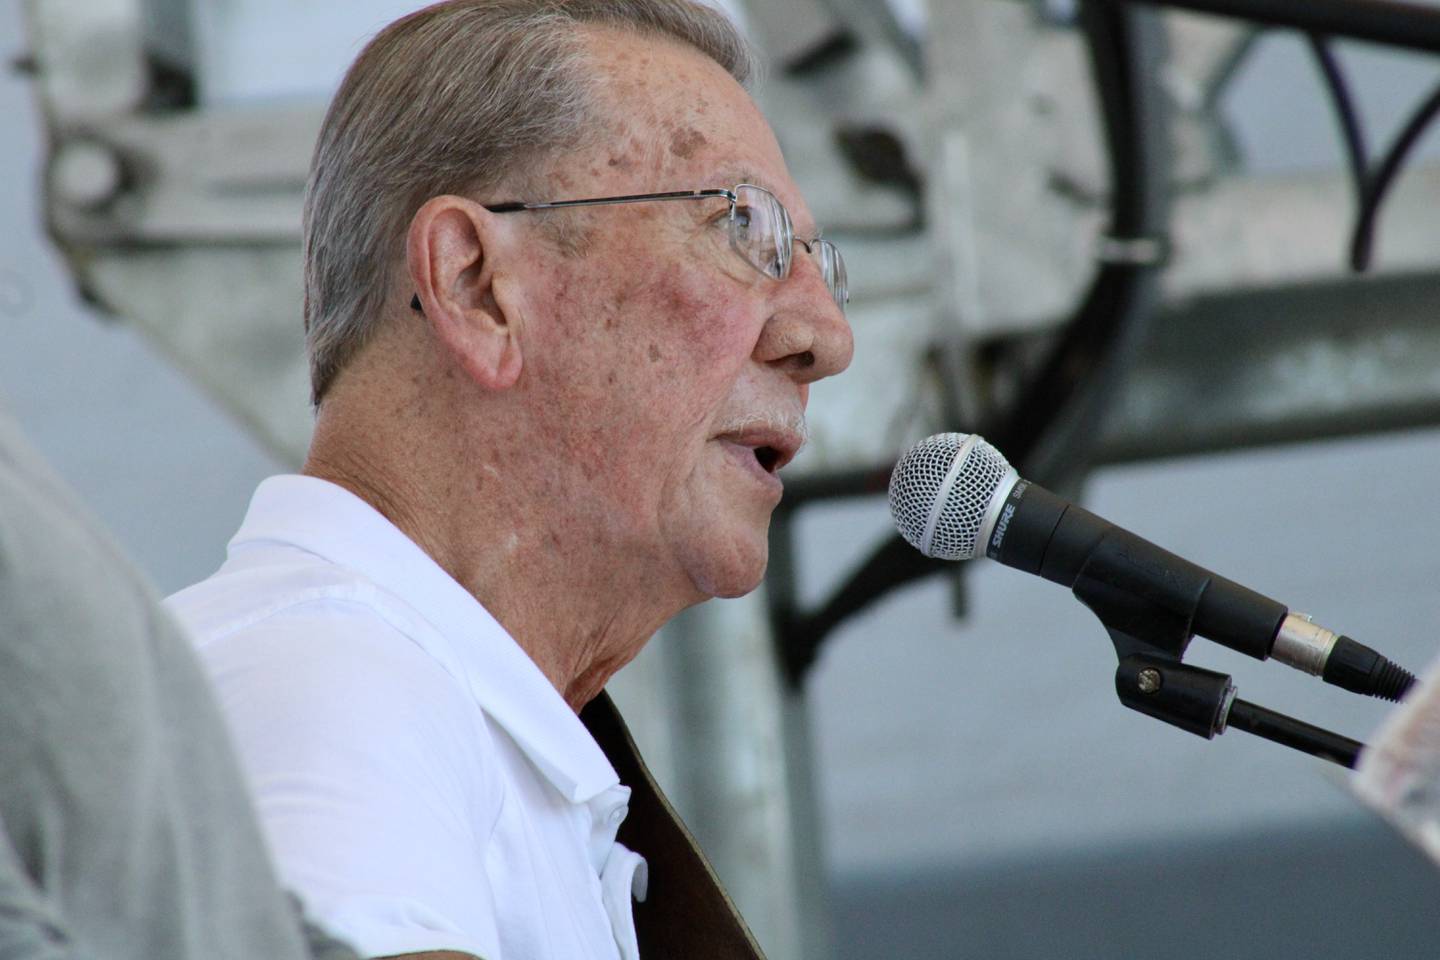 Lyle Grobe, band leader of the Rhythm Ramblers, performs Sunday from the Stella main stage as part of the Dixon Petunia Festival. Grobe was the grand marshal for the Petunia Festival parade in 2009.